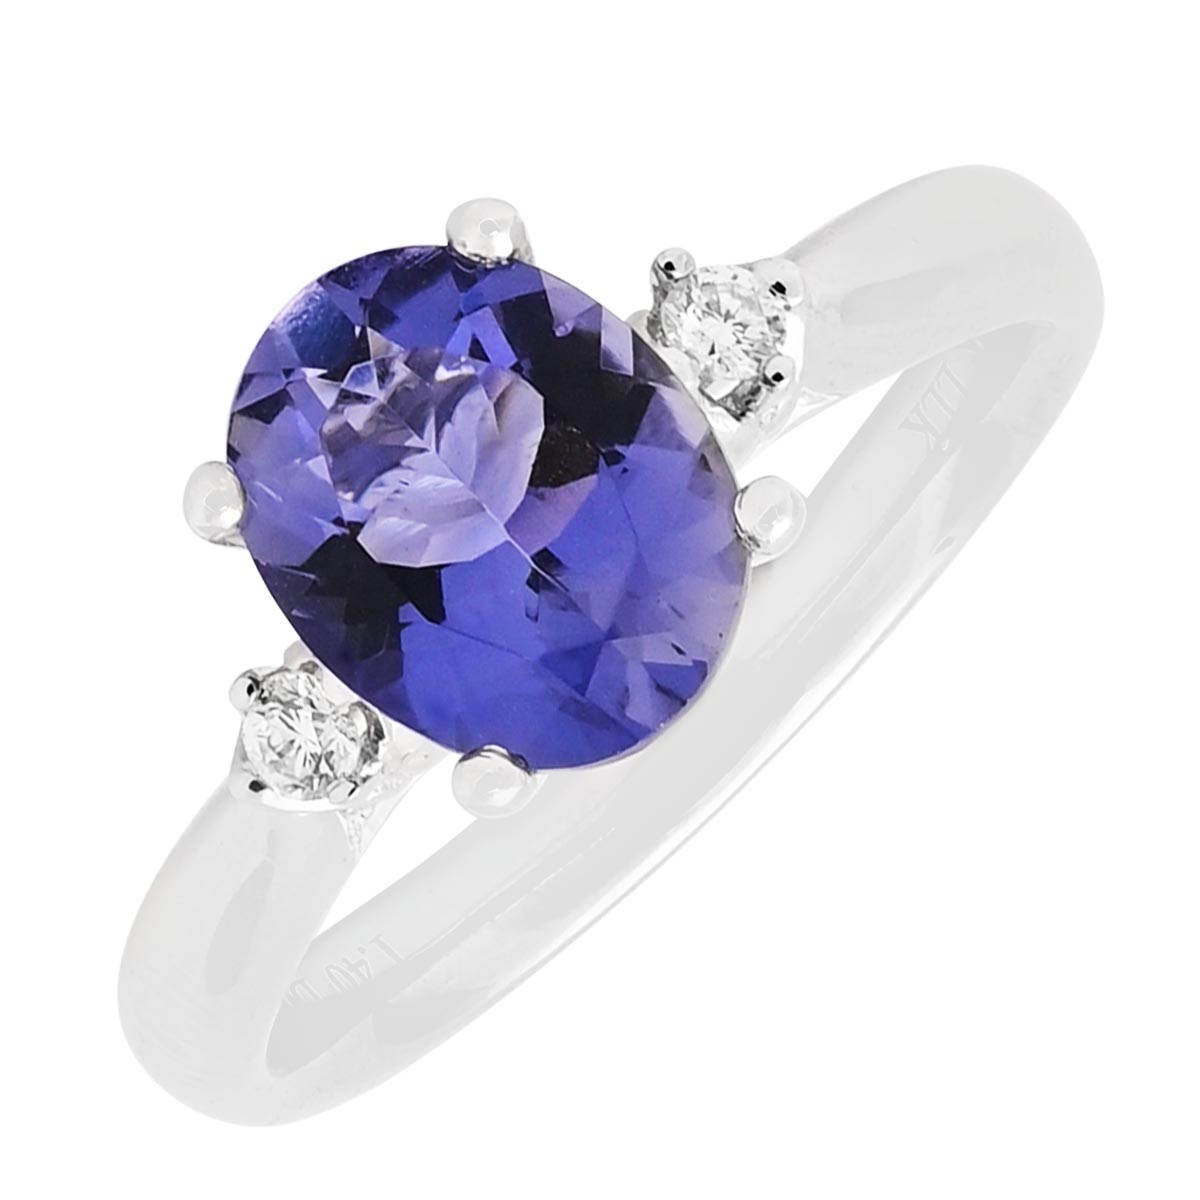 Oval Iolite Ring in 14kt White Gold with Diamonds (1/20ct tw)